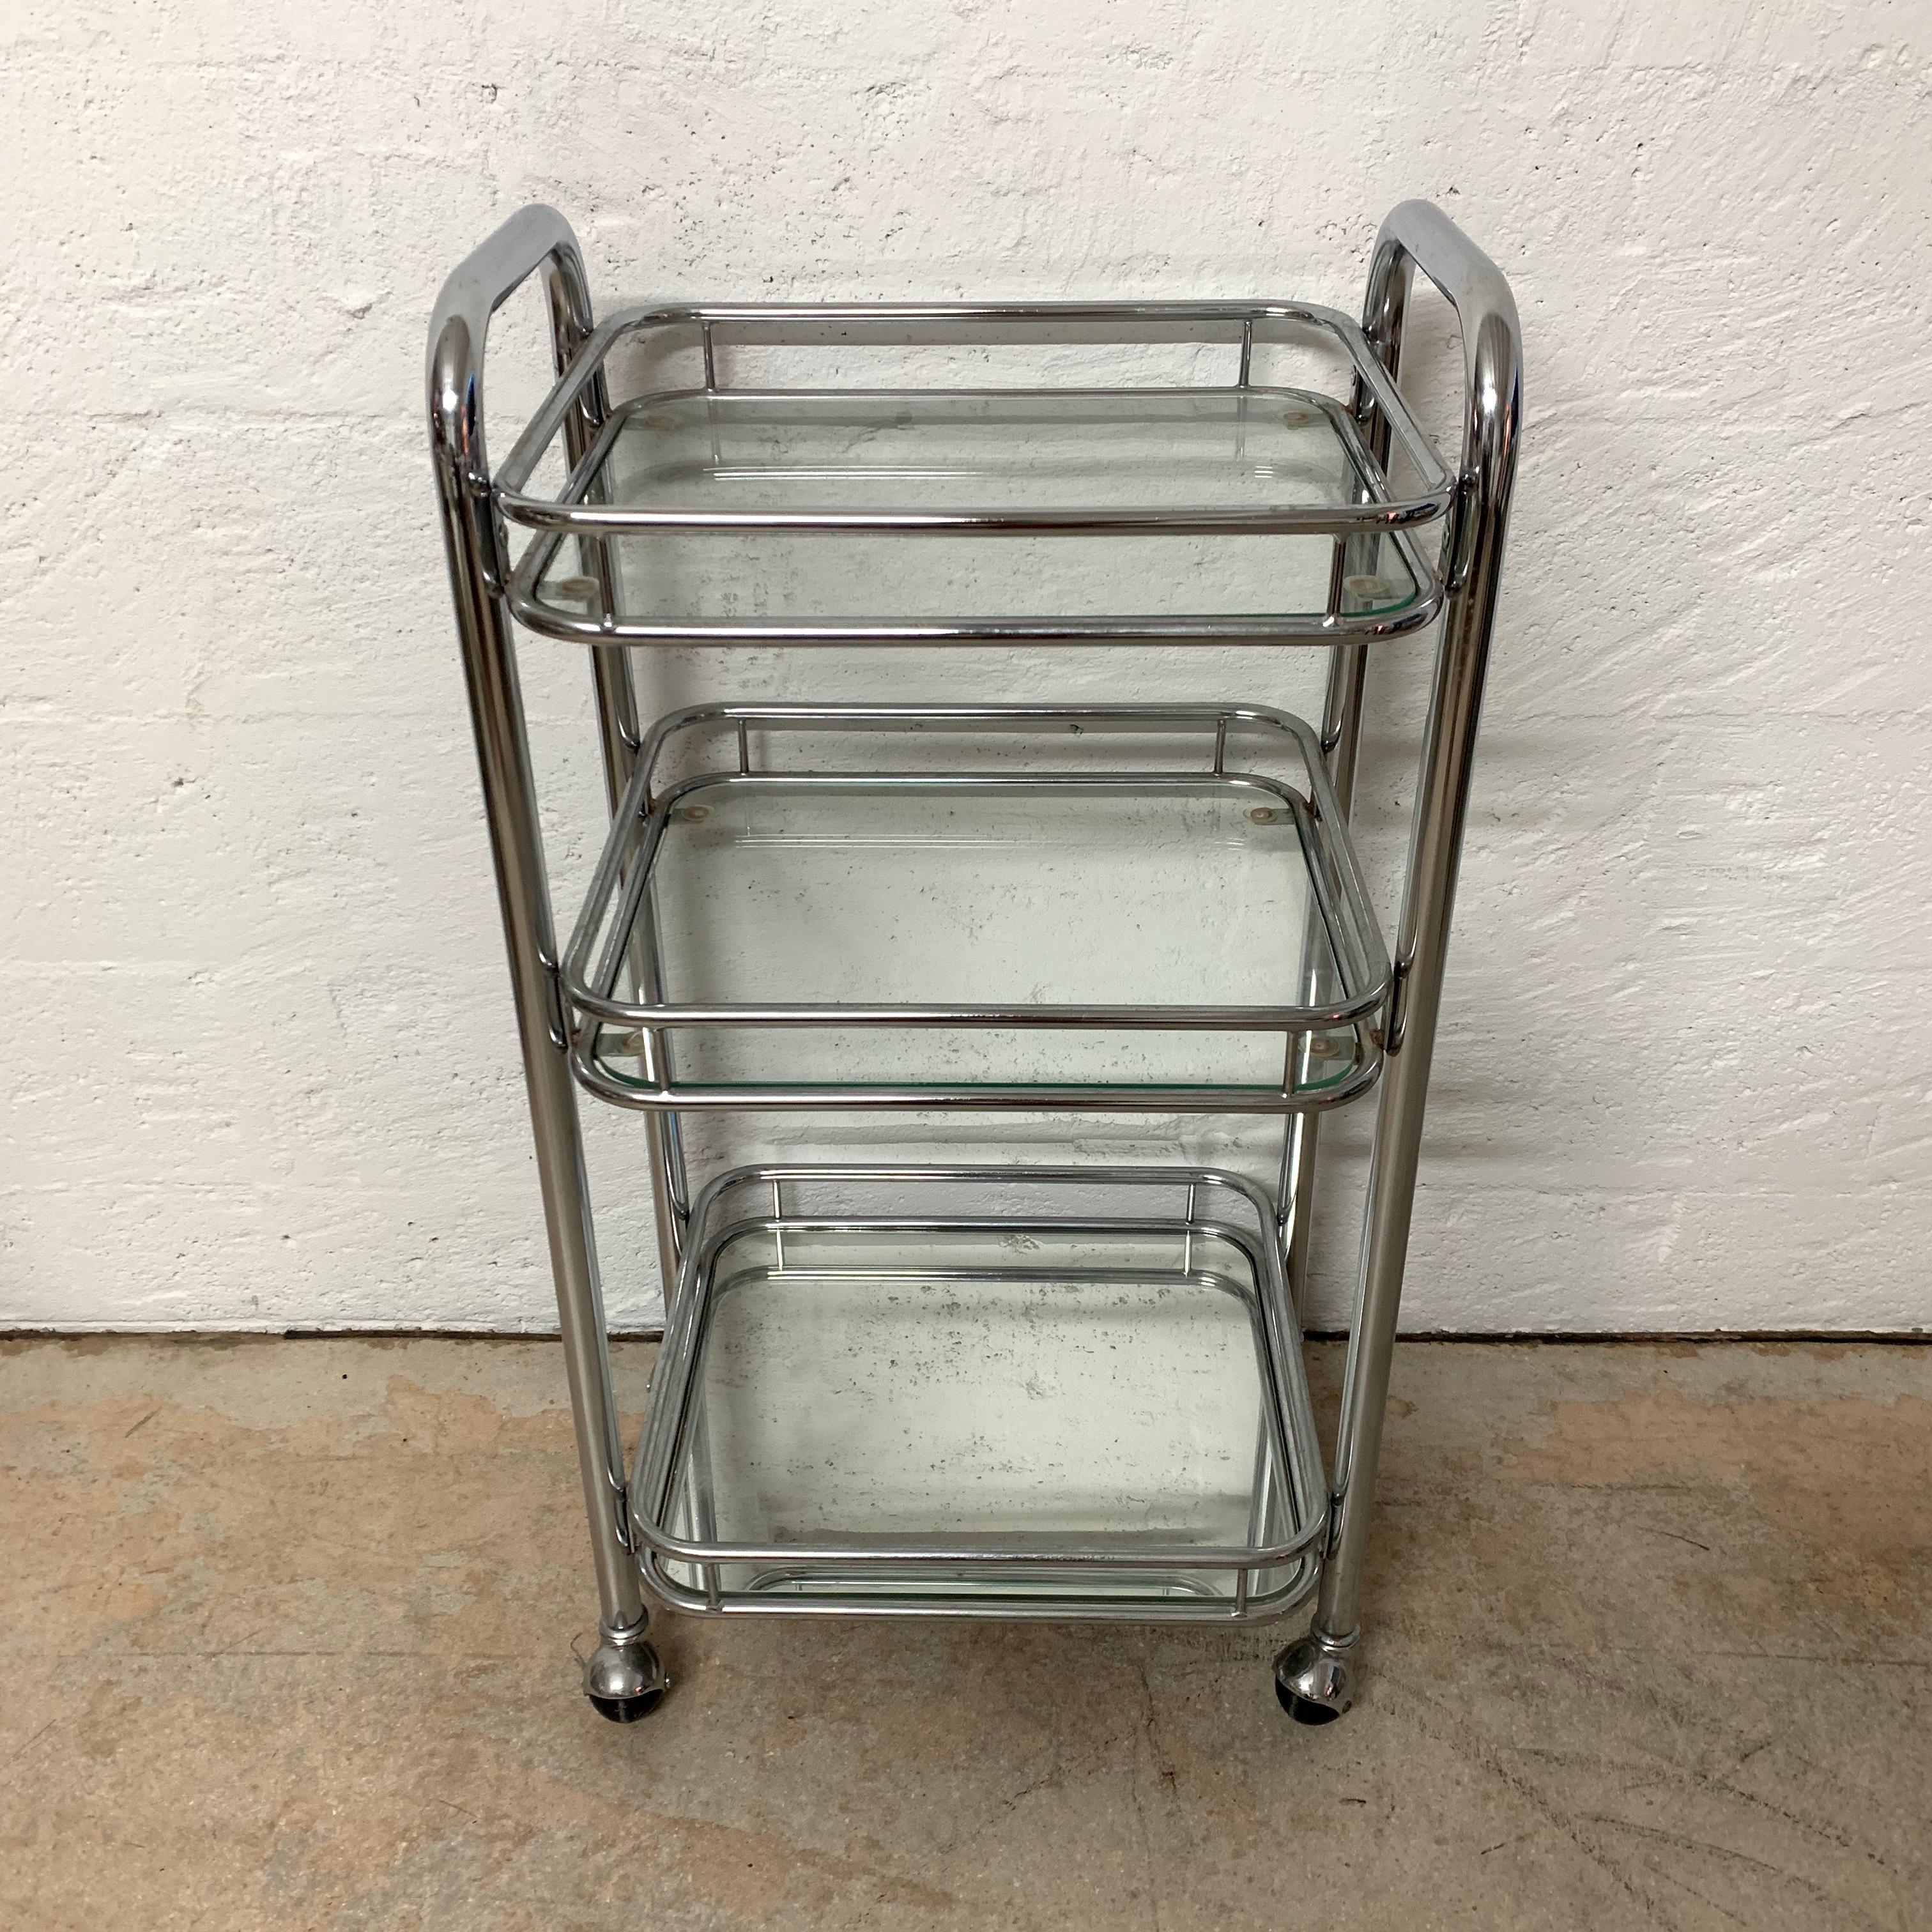 Art Deco style bar cart or trolley rendered in chrome-plated tubular steel with 4 wheels or castors for mobility and 2 glass shelves and a mirrored bottom shelf.